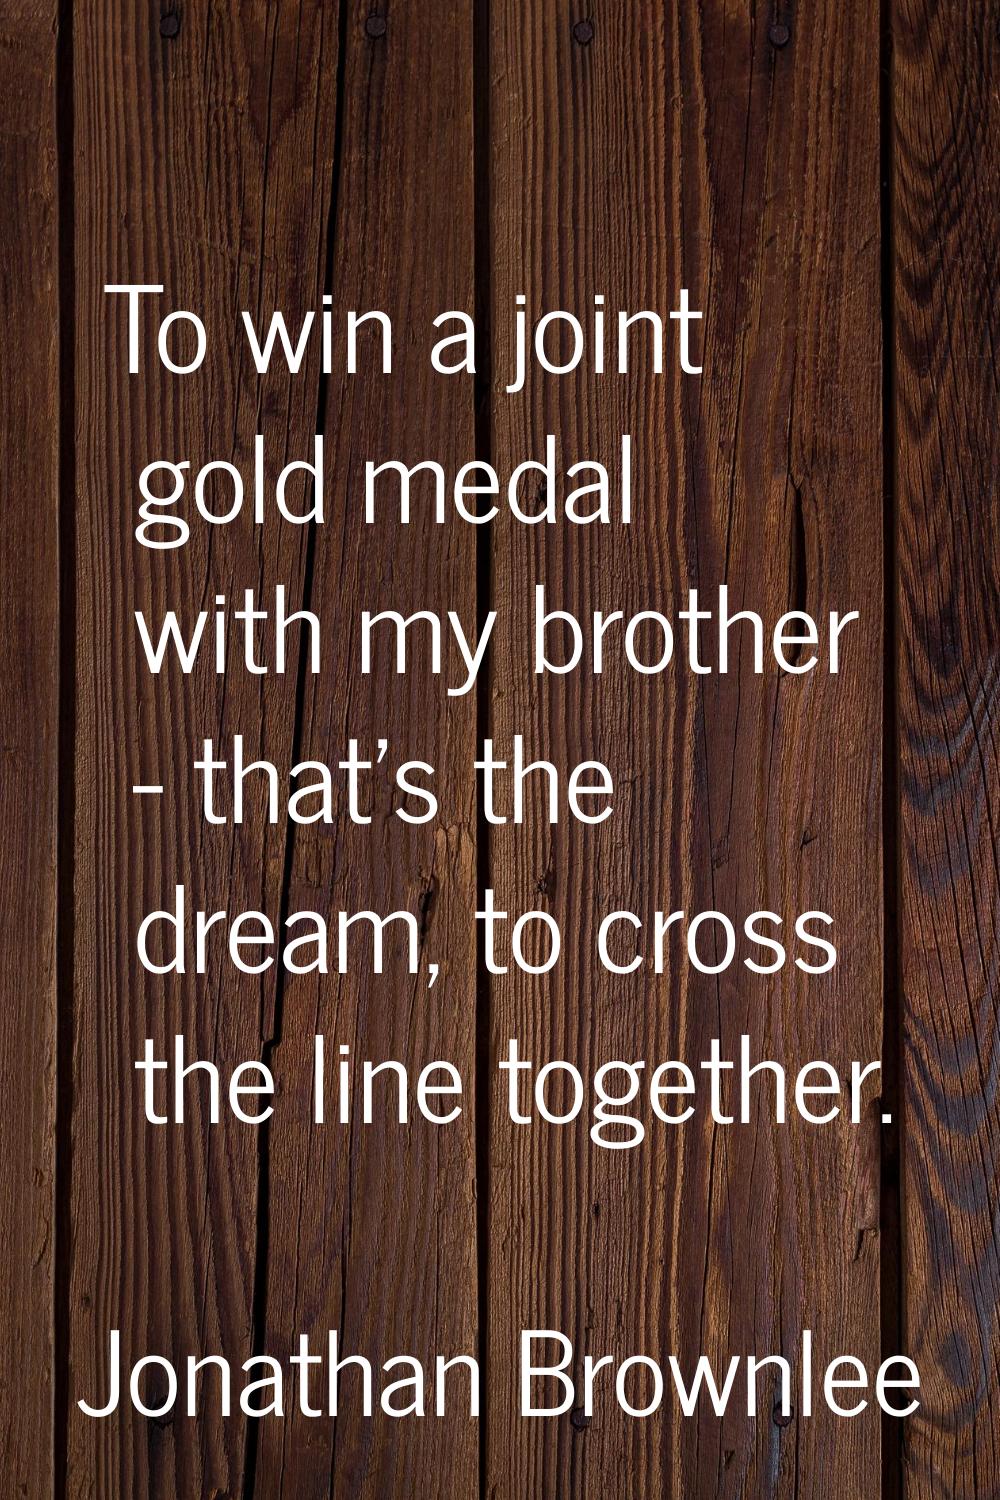 To win a joint gold medal with my brother - that's the dream, to cross the line together.